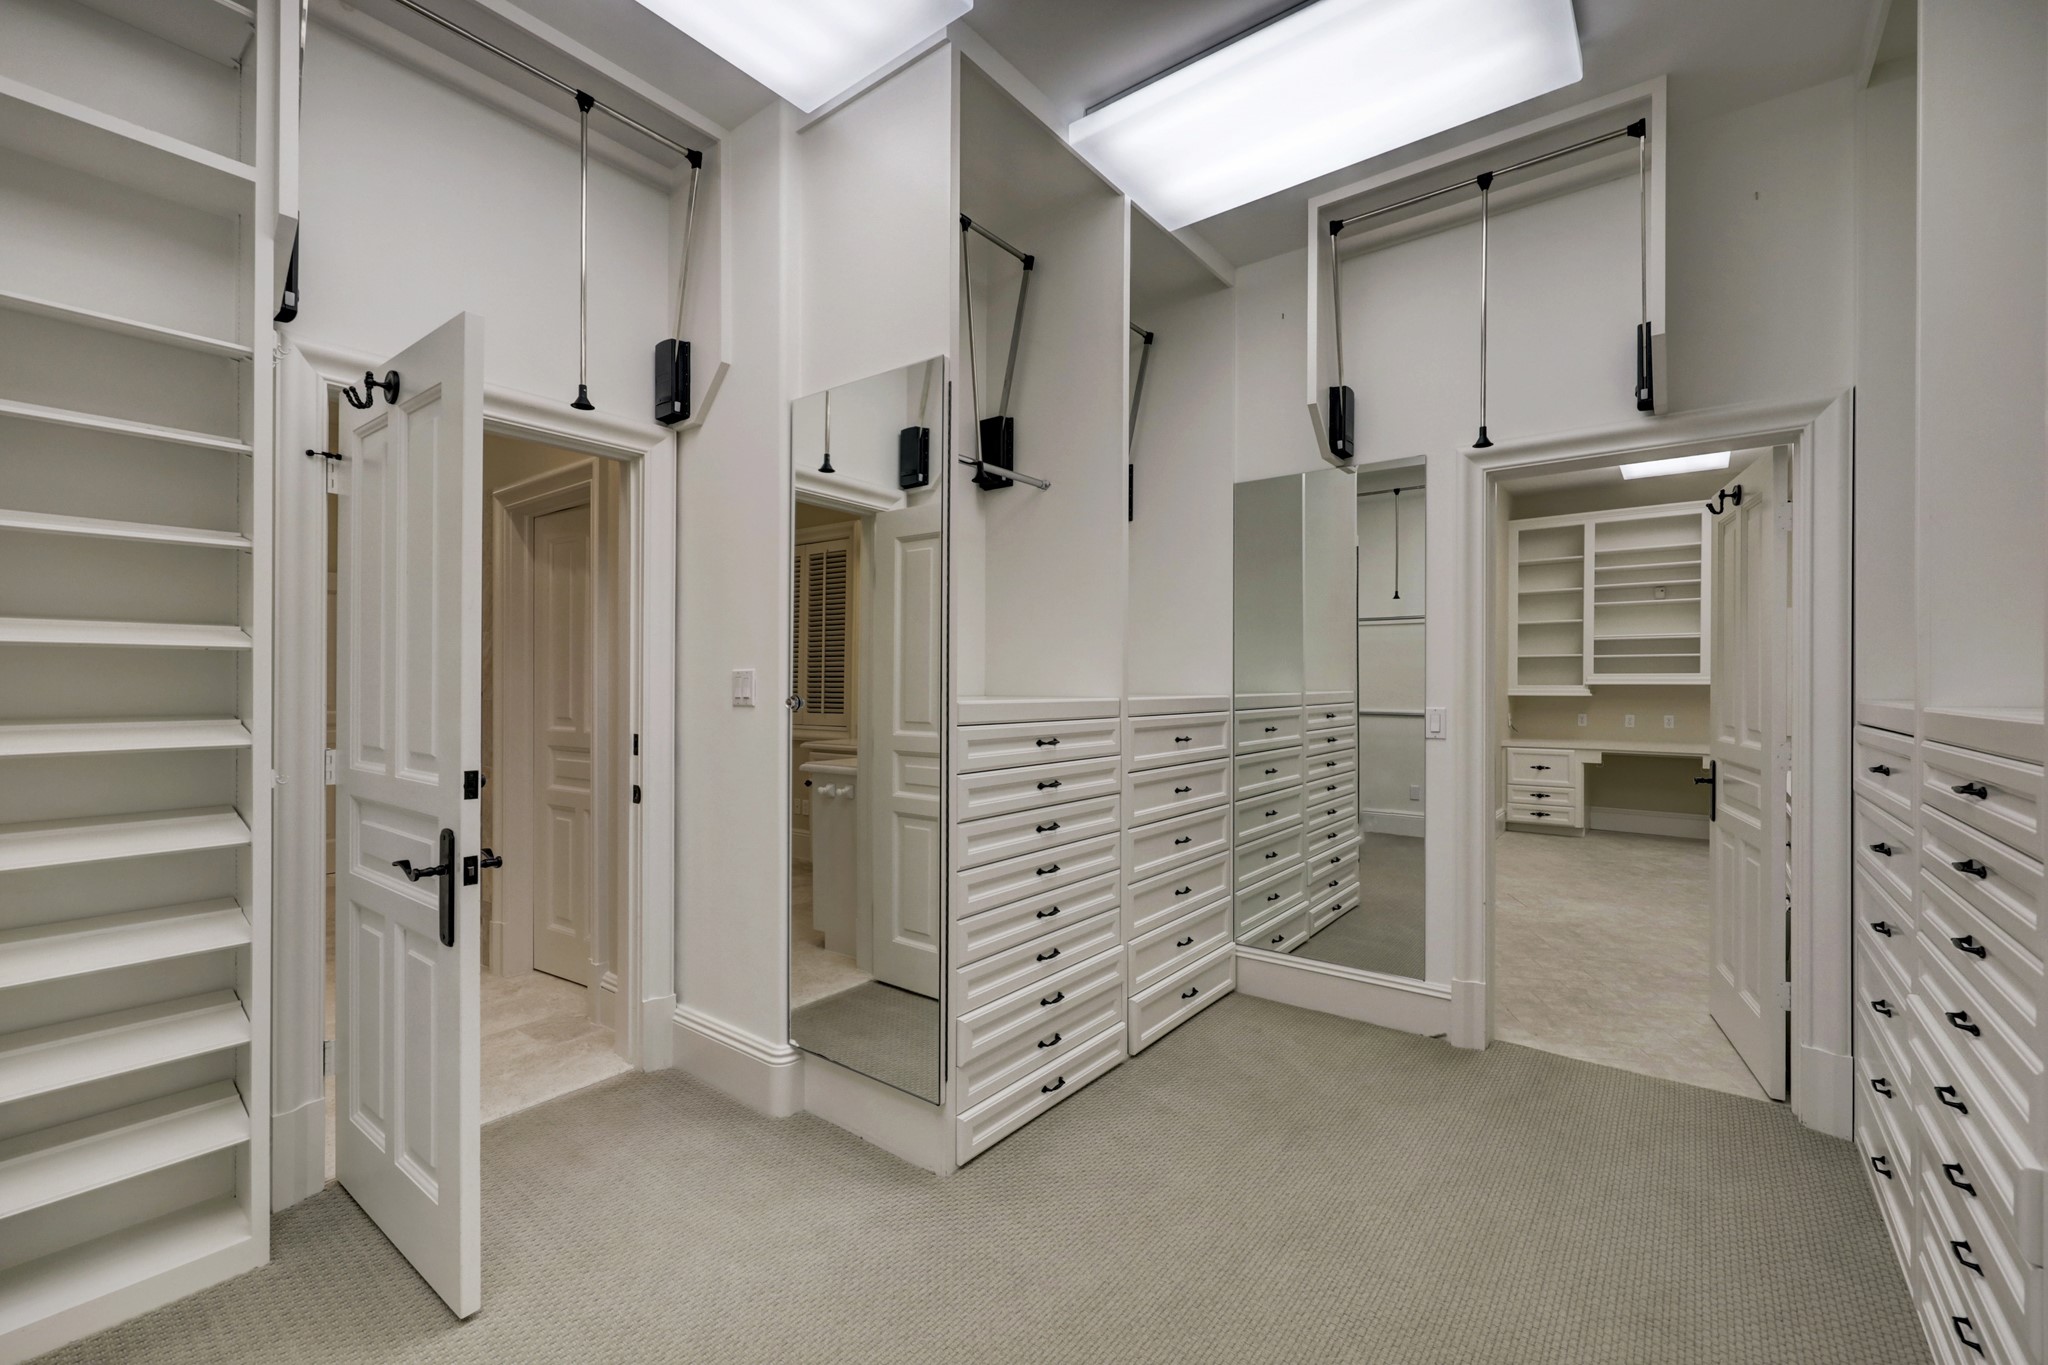 Another view of one of the Primary closets.  Ample drawers and shelves plus single, double and triple hanging rods.  The vanity is out of view to the right of the image.  This large closet is located between one of the dual baths and the private office.